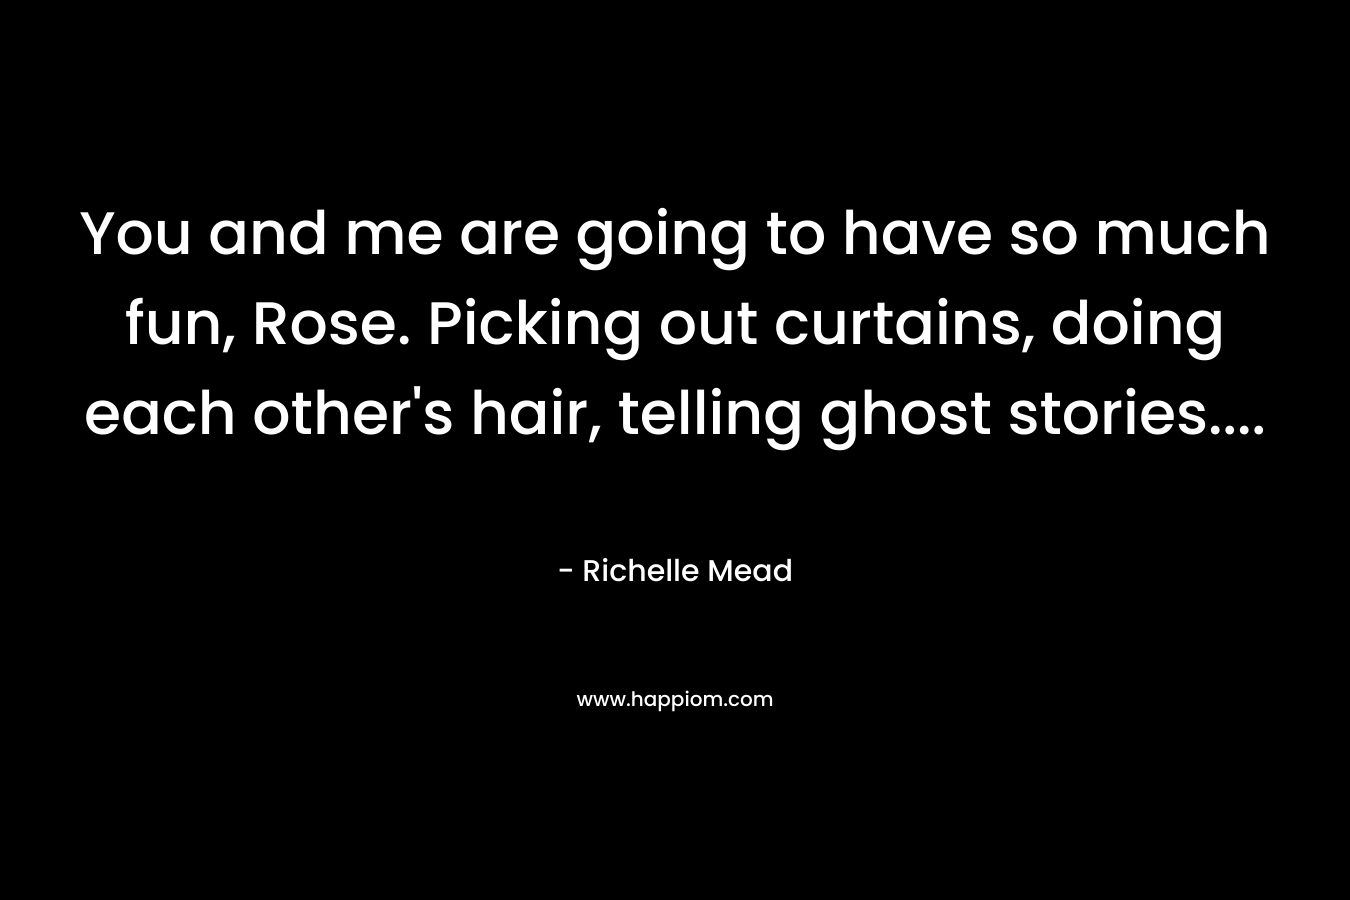 You and me are going to have so much fun, Rose. Picking out curtains, doing each other’s hair, telling ghost stories…. – Richelle Mead